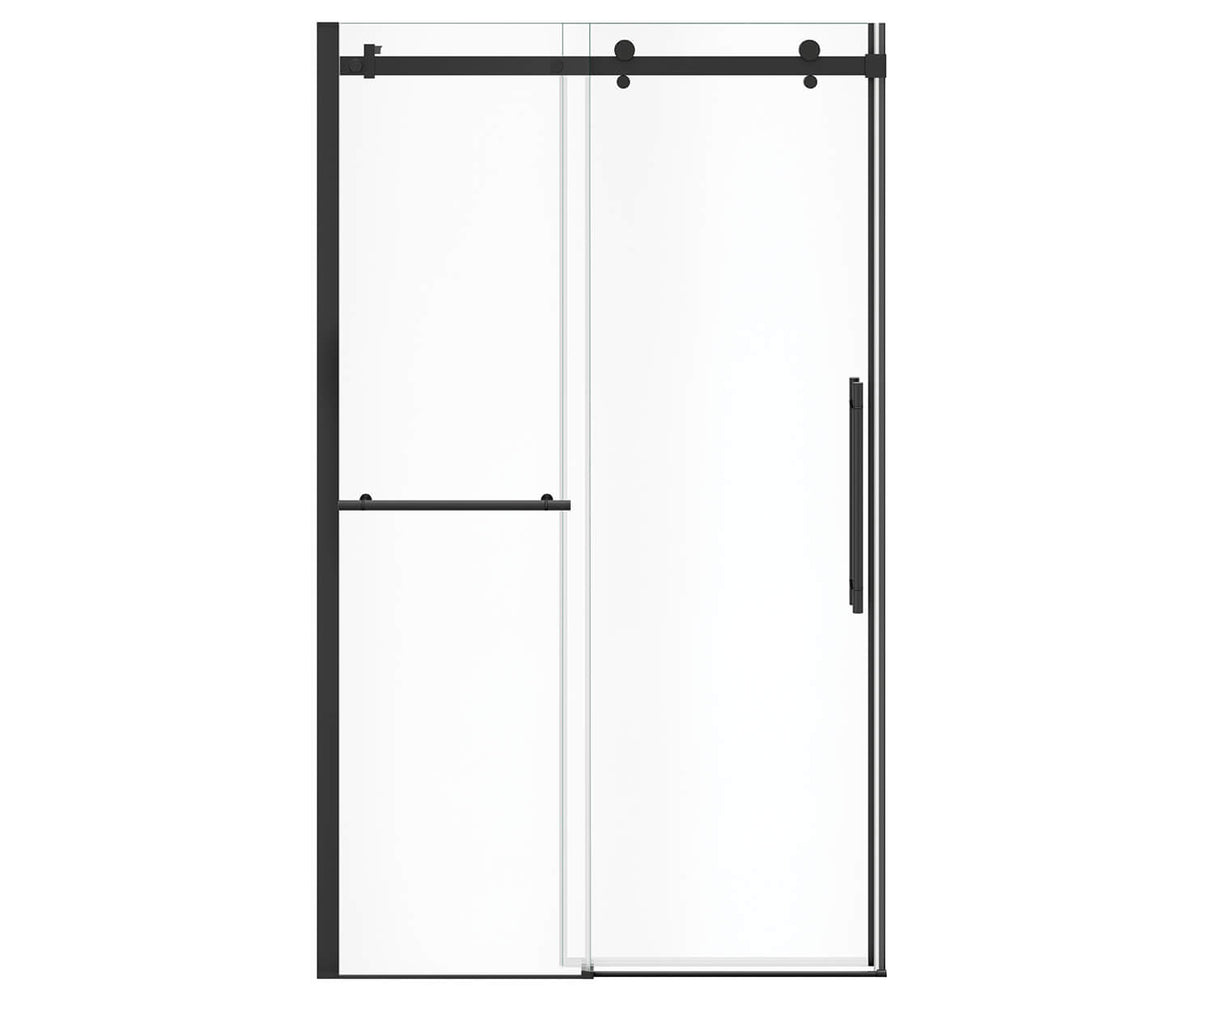 MAAX 138465-900-340-000 Vela 44 ½-47 x 78 ¾ in. 8mm Sliding Shower Door with Towel Bar for Alcove Installation with Clear glass in Matte Black